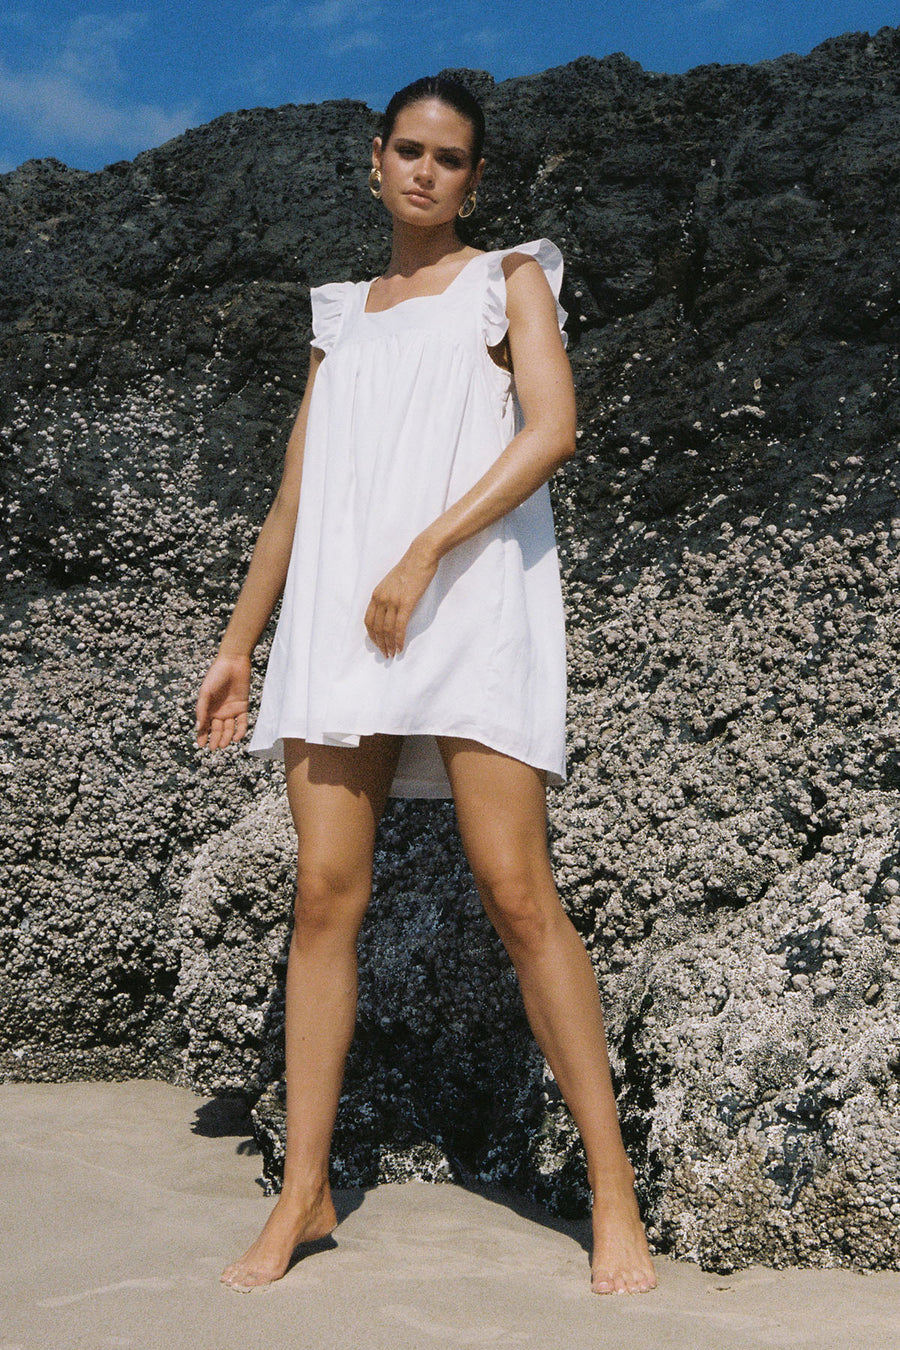 Lorna Dress - White | Madison The Label - Clearance